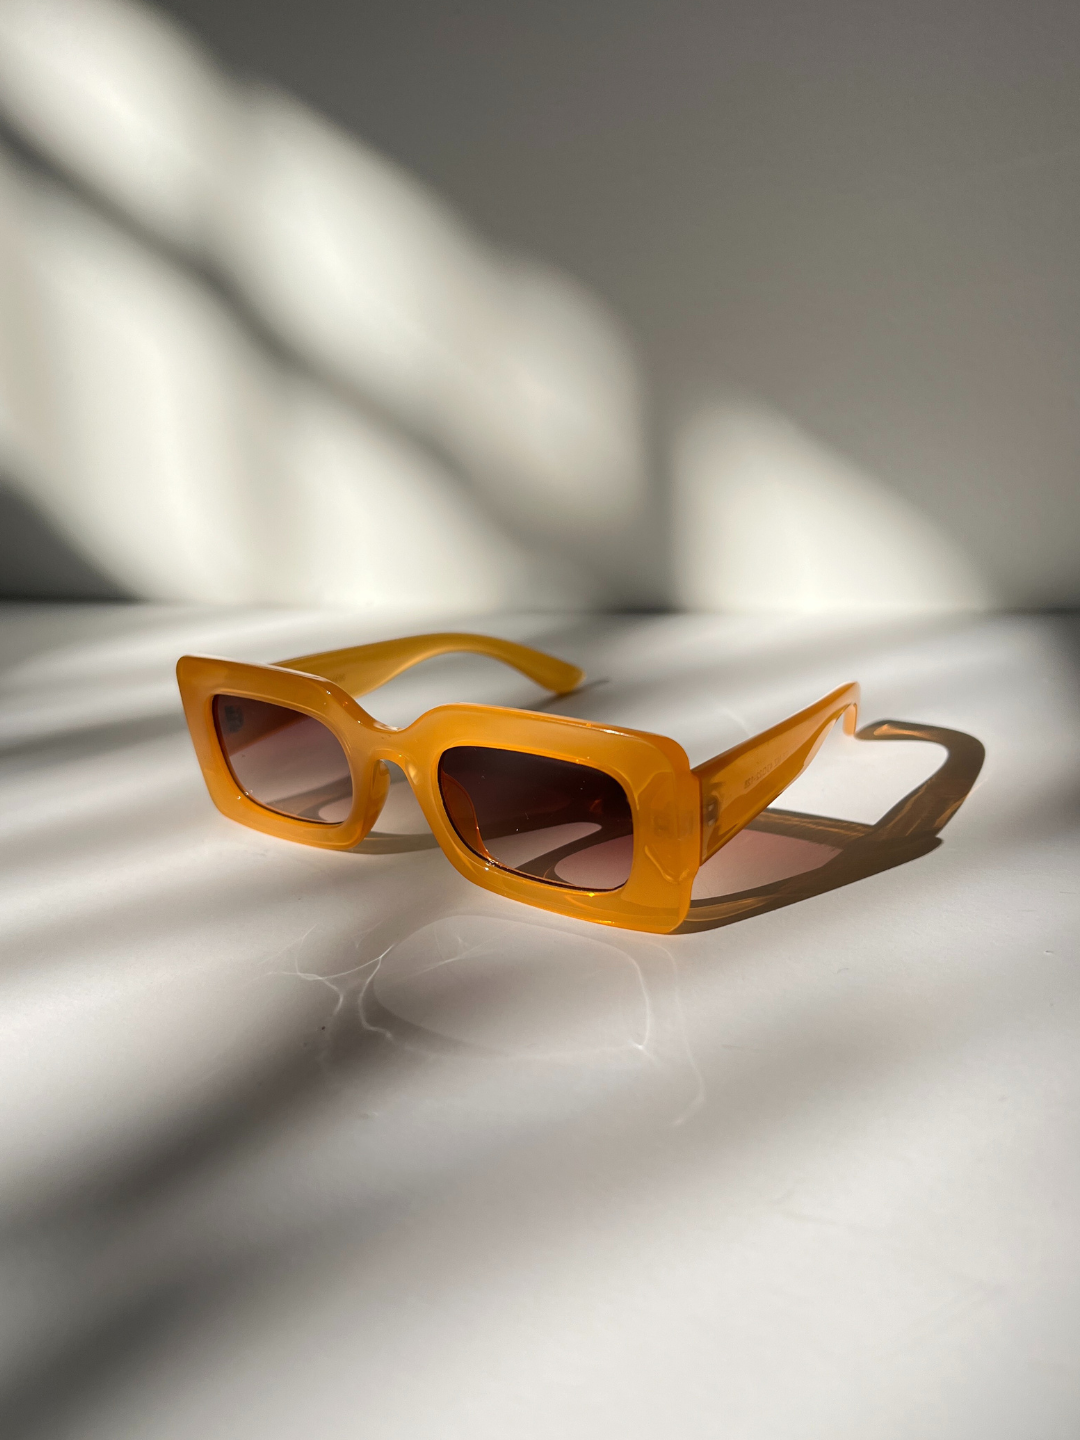 Orange | Kids rectangle sunglasses in orange, on a grey background with areas of sunlight, creating shadows of the sunglasses.